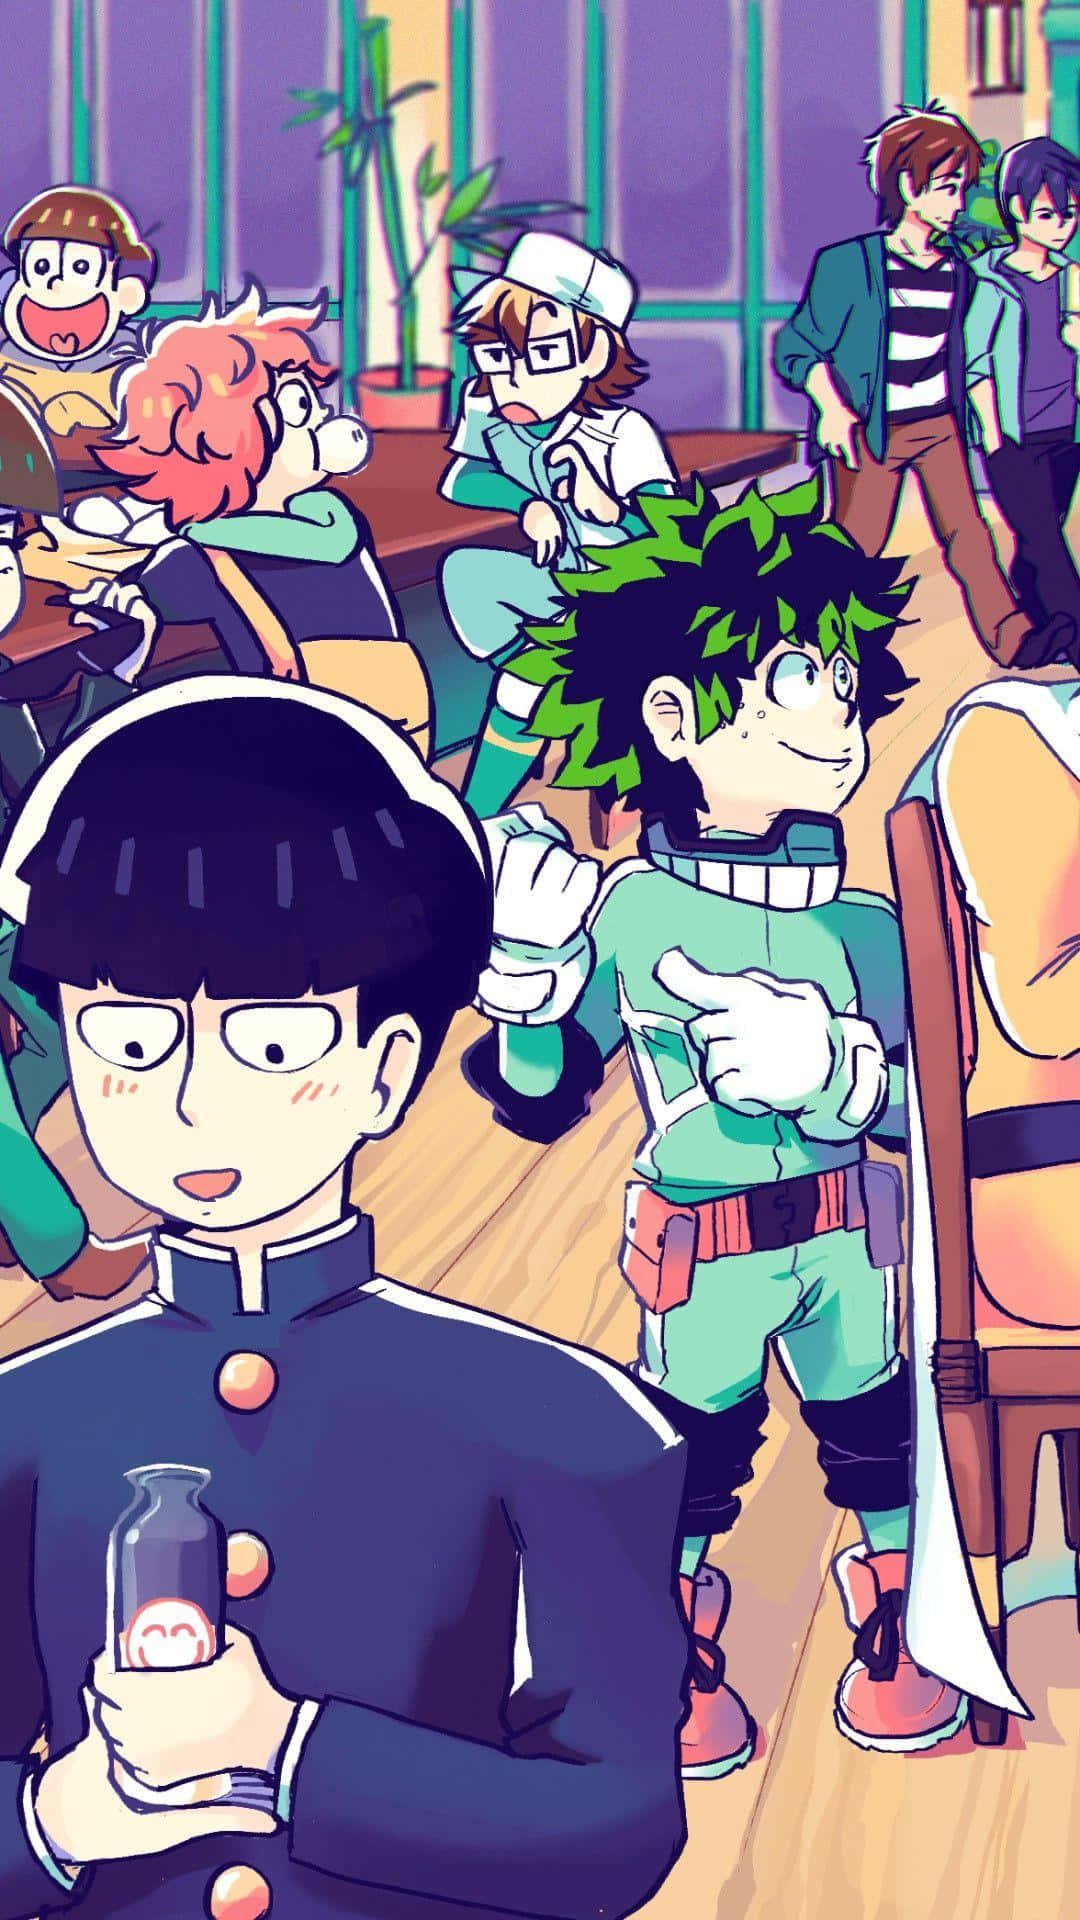 Be empowered with Mob Psycho 100 on your iPhone Wallpaper